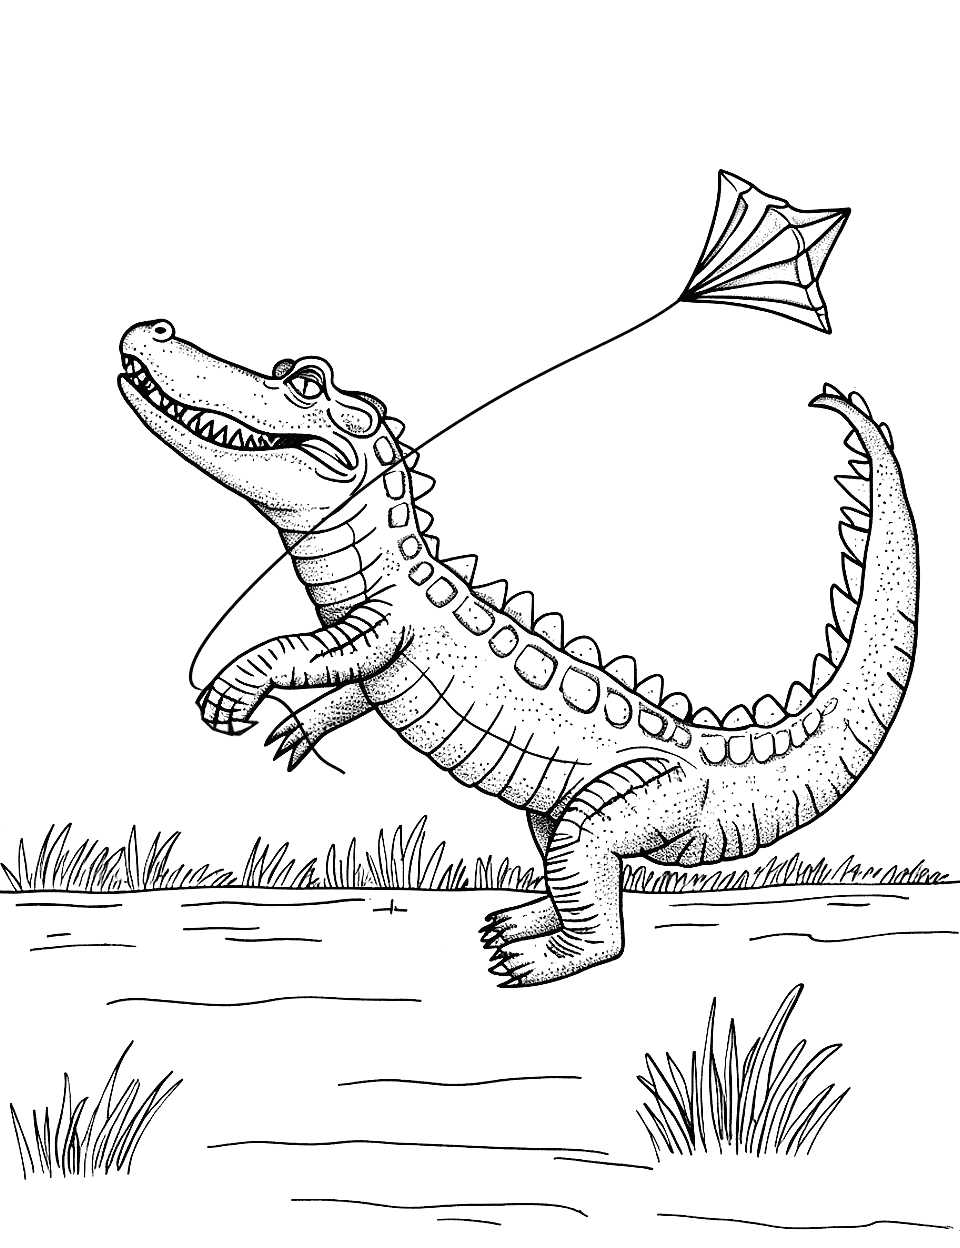 Crocodile and the Kite Coloring Page - A crocodile flying a kite on a windy day.